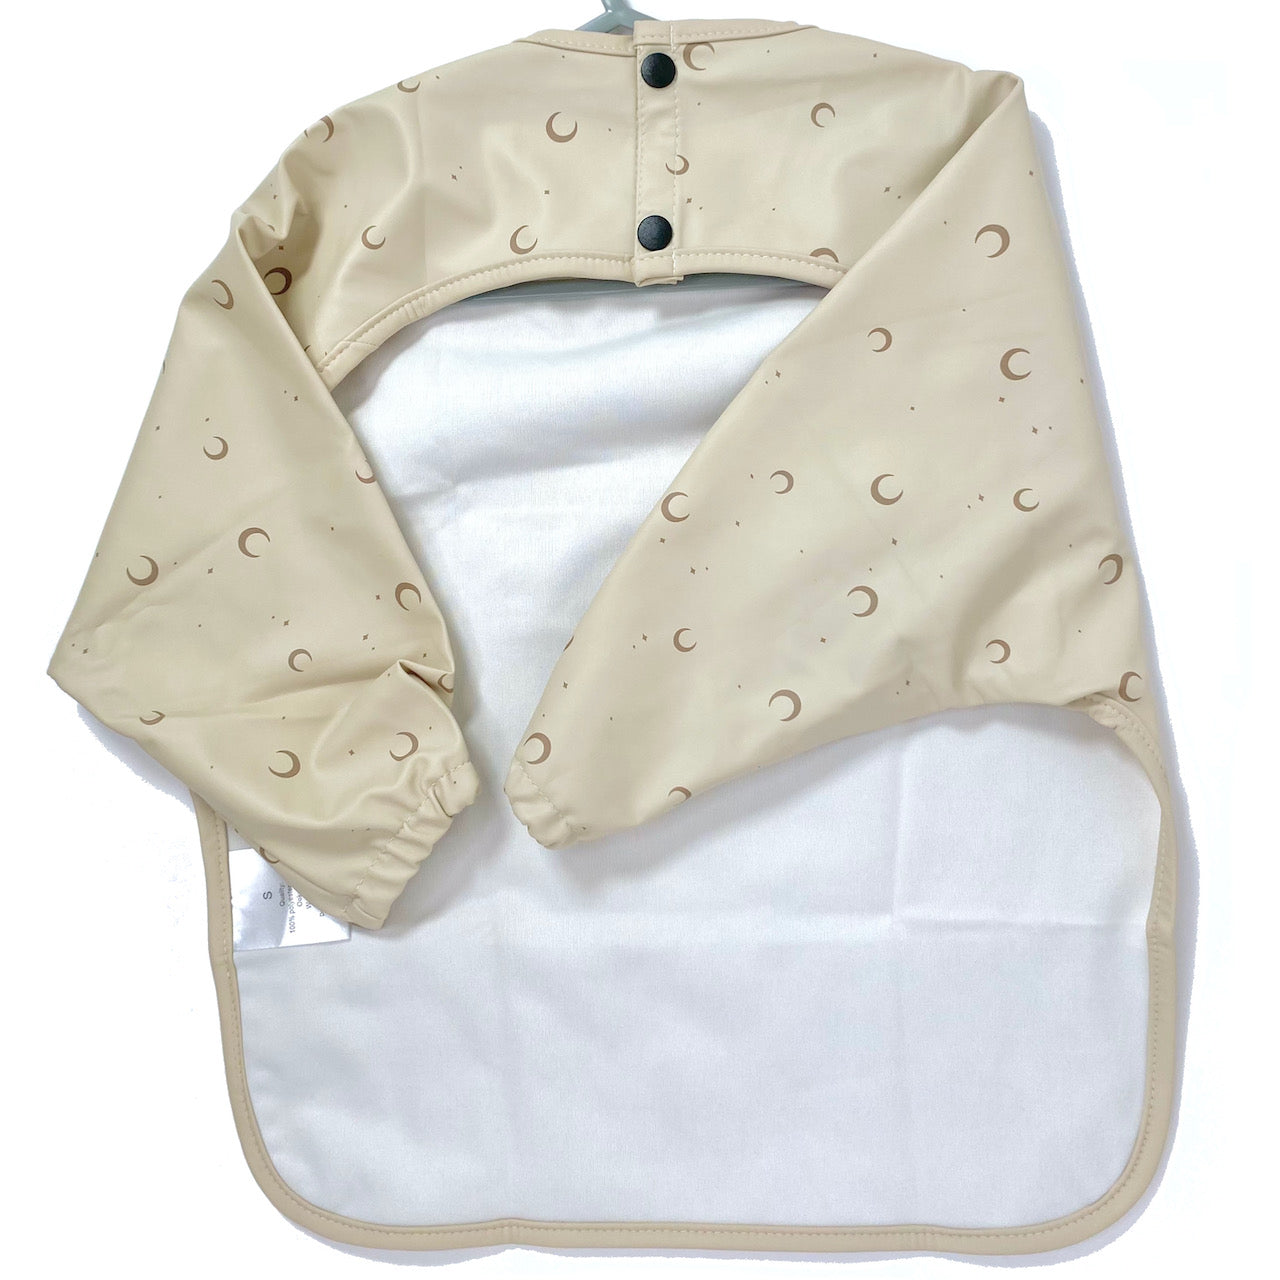 Long-sleeve kids apron in a beige and moon design, showing back view.